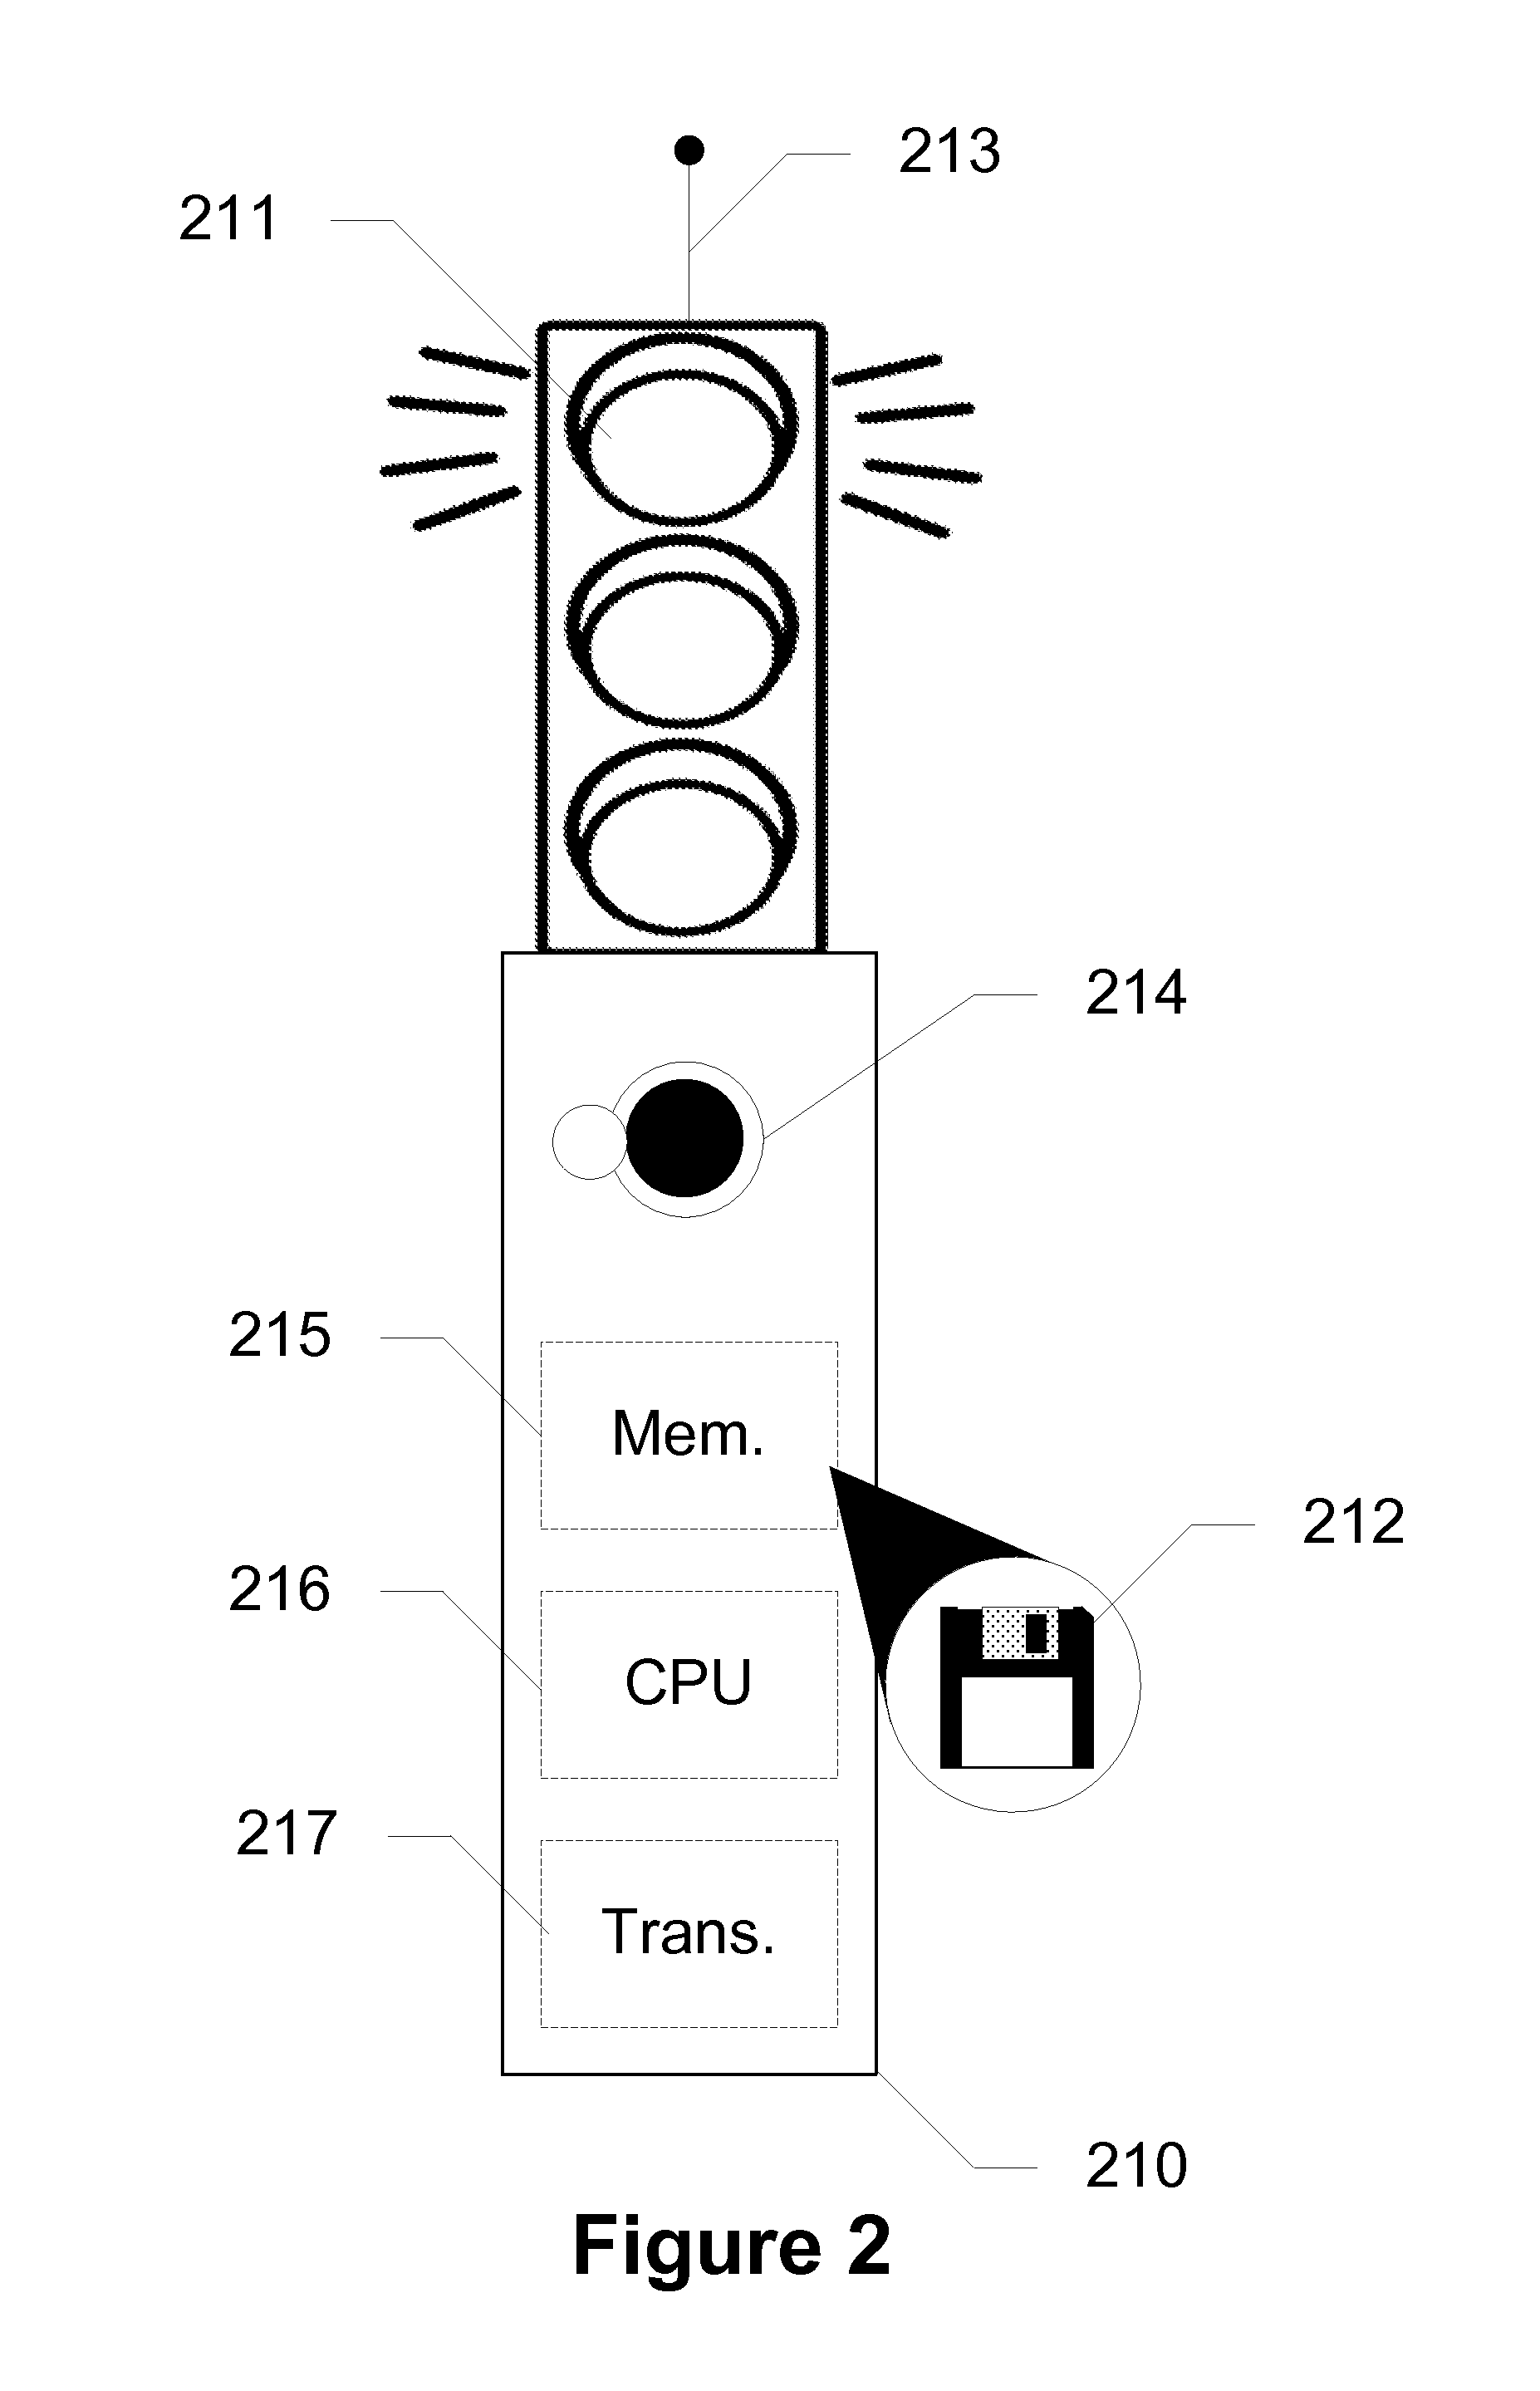 Devices, Systems and Methods for Detecting a Traffic Infraction